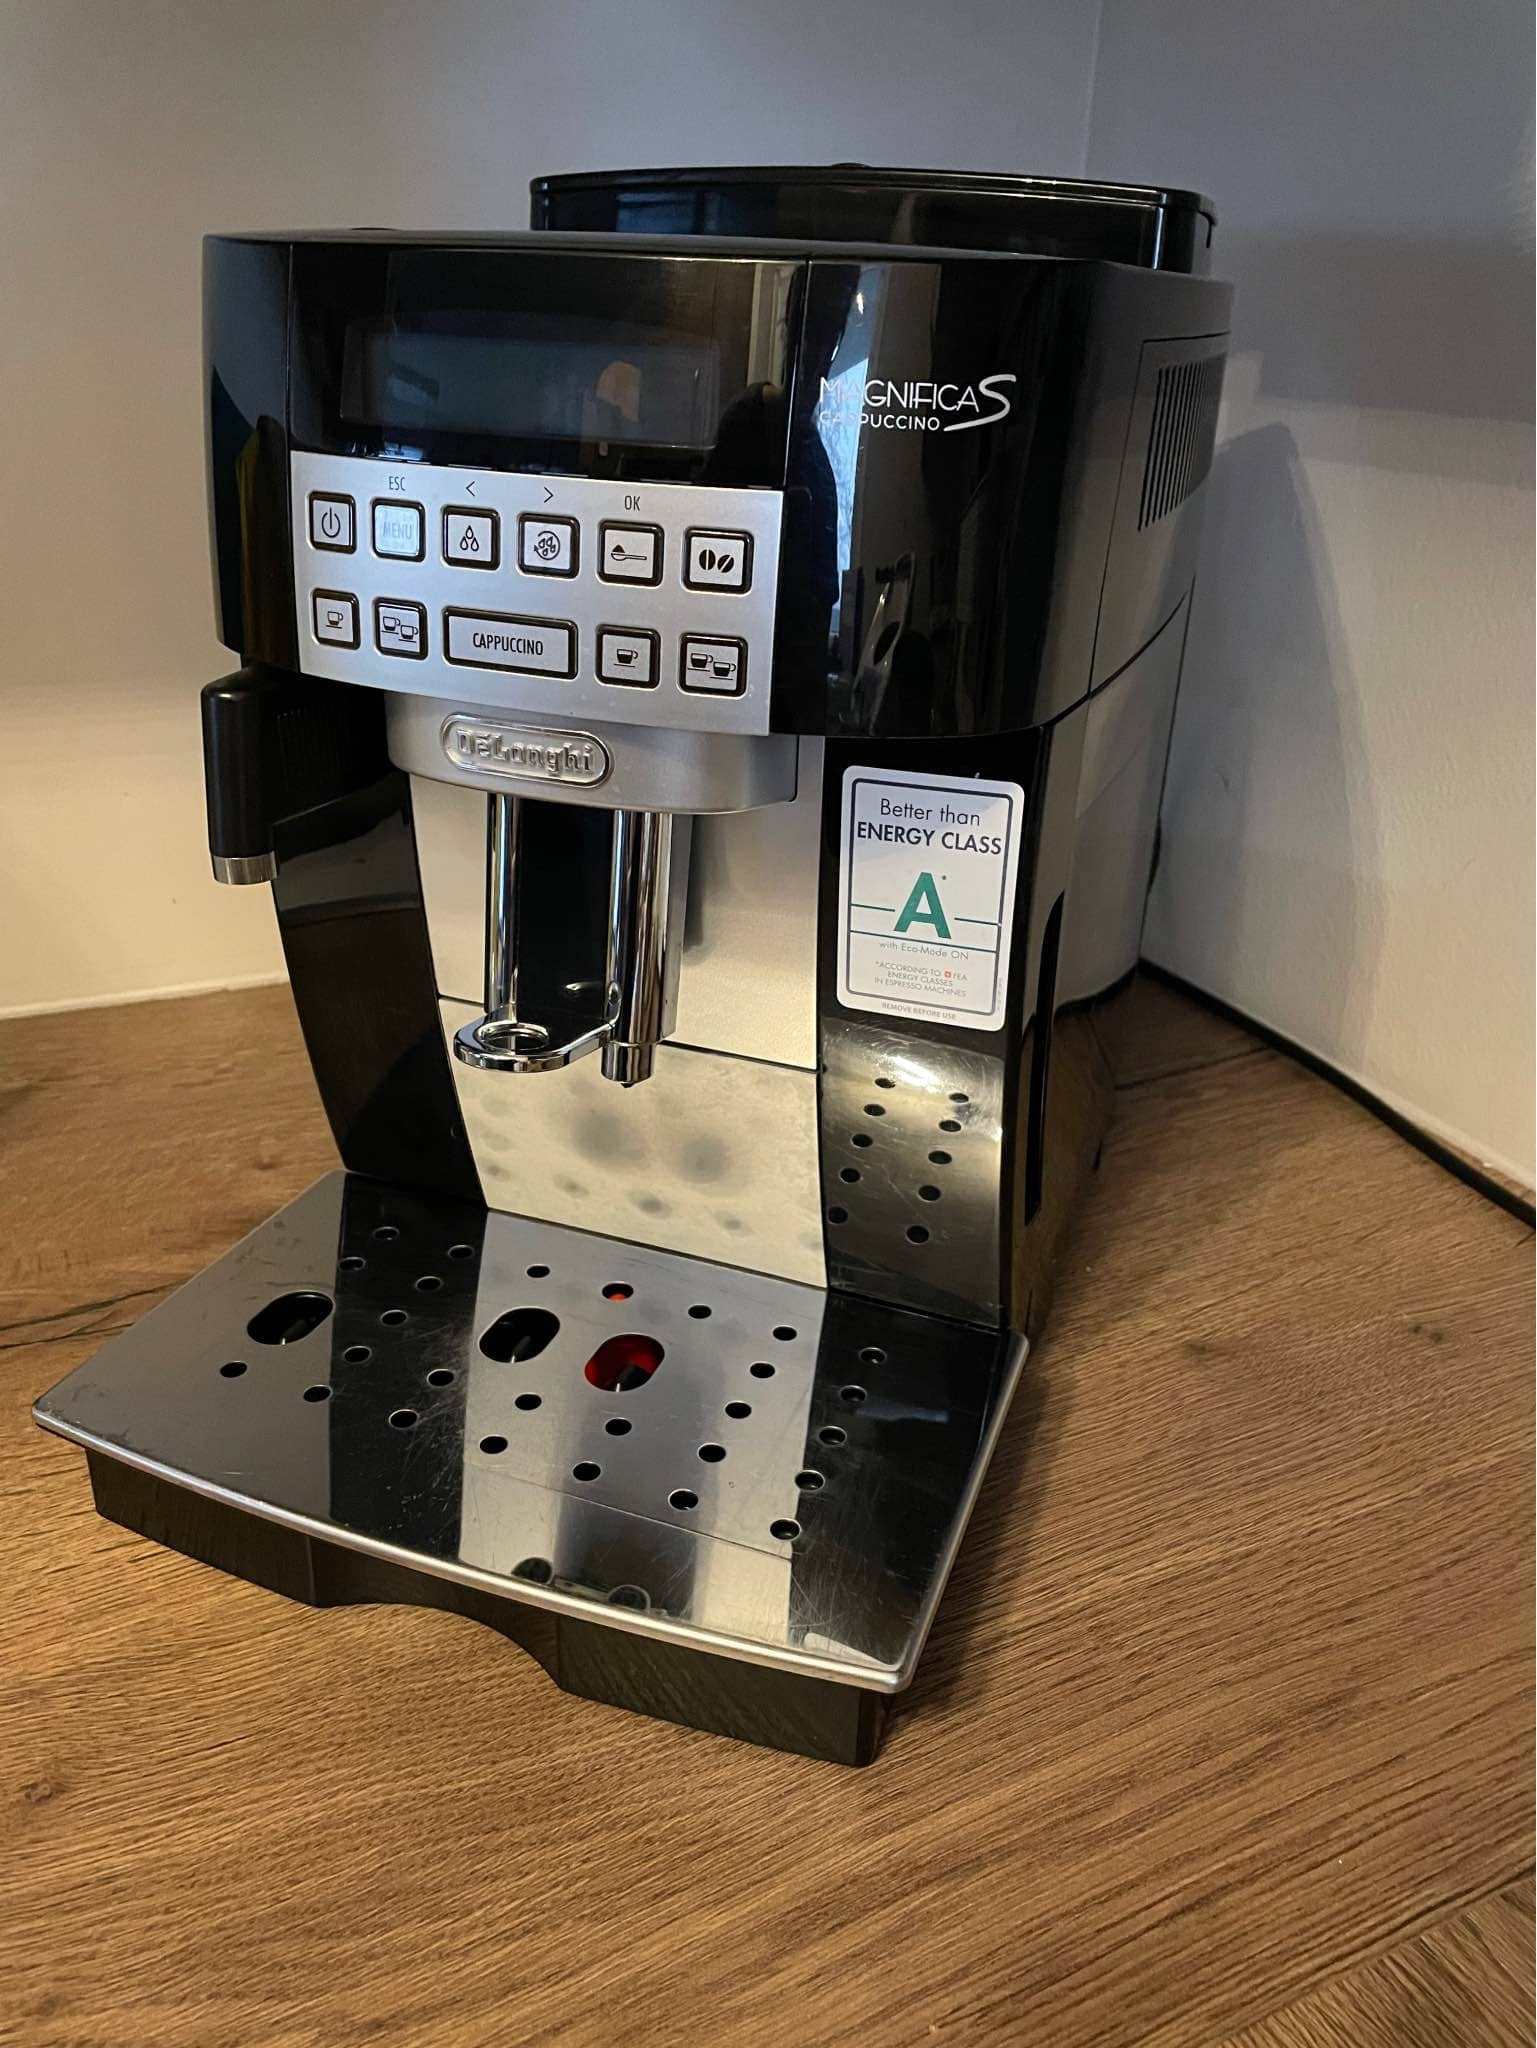 Delonghi Magnifica S tends to brew warm coffees